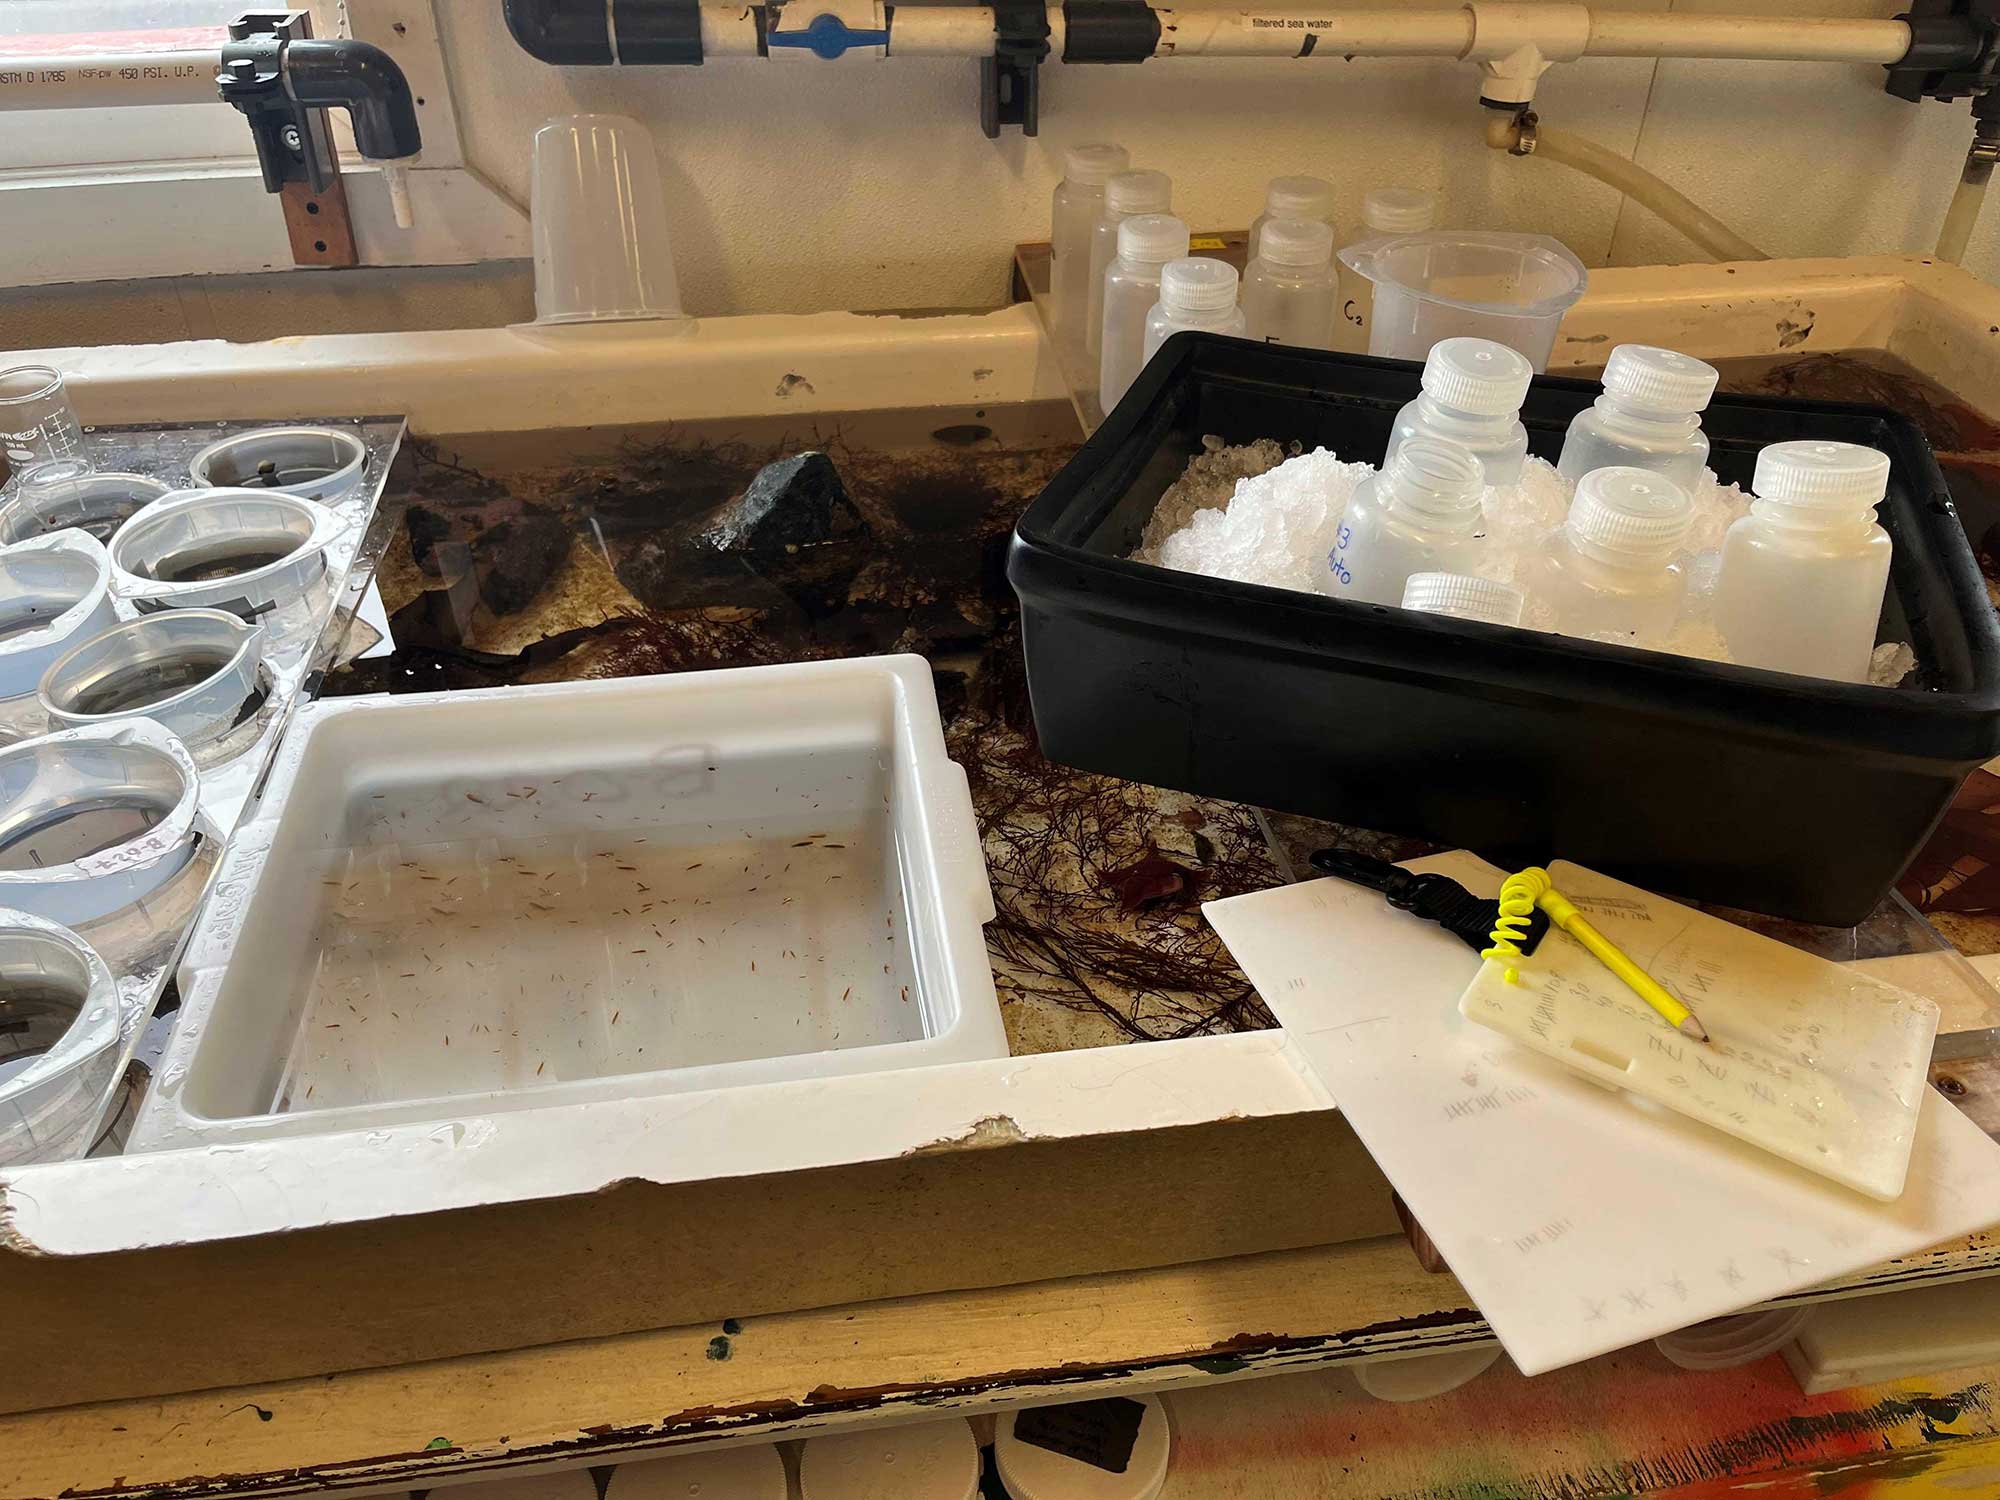 White rectangular plastic tub filled with red amphipods no bigger than a pinkie fingernail floats in shallow water aquaria as the amphipods are counted into opaque jars nestled in a black thick foamed tray; of ice, two small sheets of white plastic, one with a yellow pencil, is nearby to record the numbers transferred